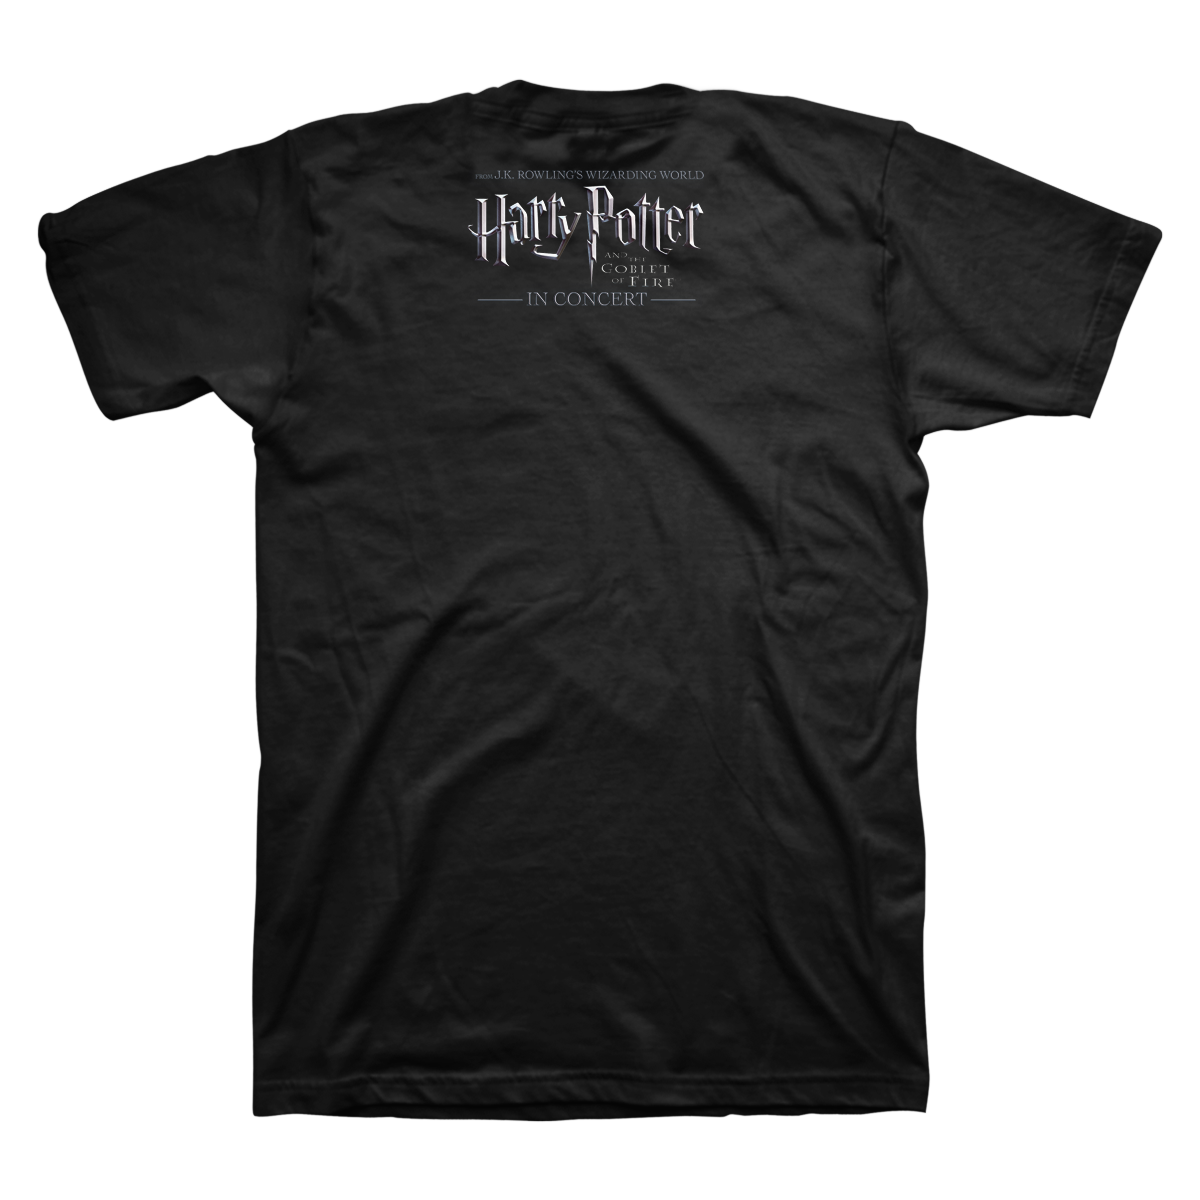 "Snowglobe" T-Shirt (from Harry Potter and the Goblet of Fire™ in Concert)